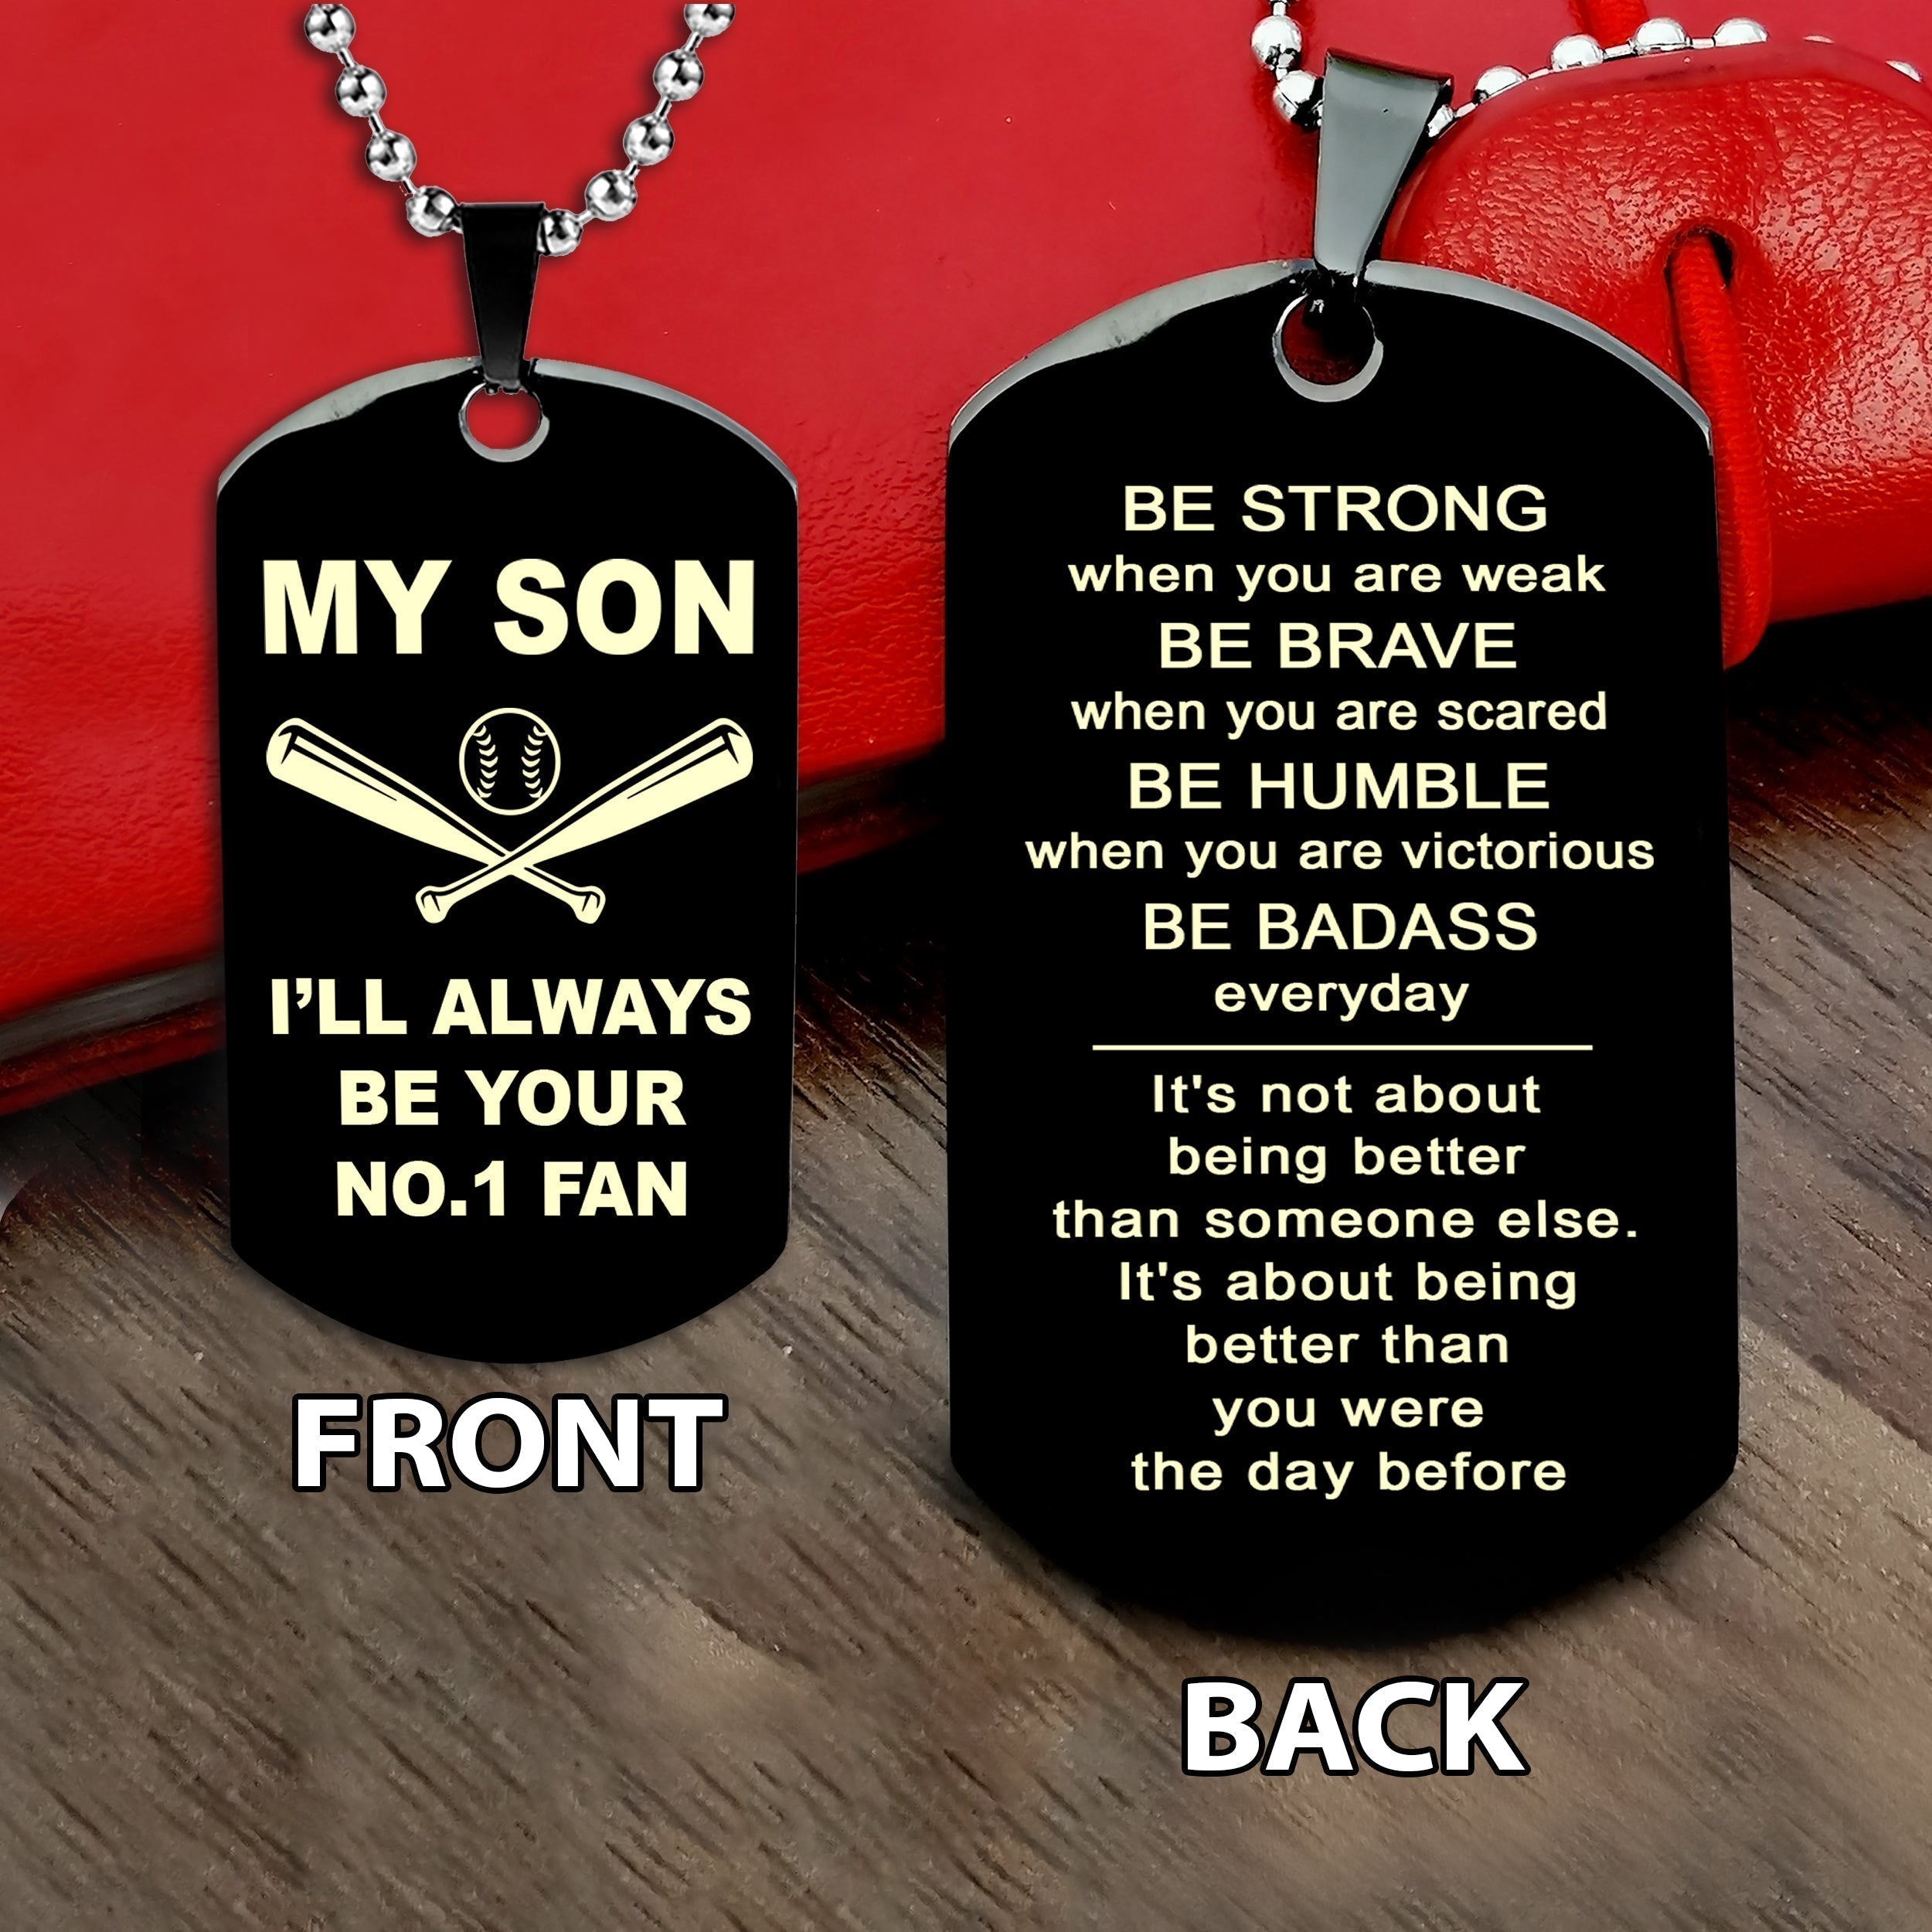 Baseball customizable engraved double sided dog tag gifts from dad mom to son, Be strong be brave be humble, It is not about better than someone else, It is about being better than you were the day before, Be strong be brave be humble